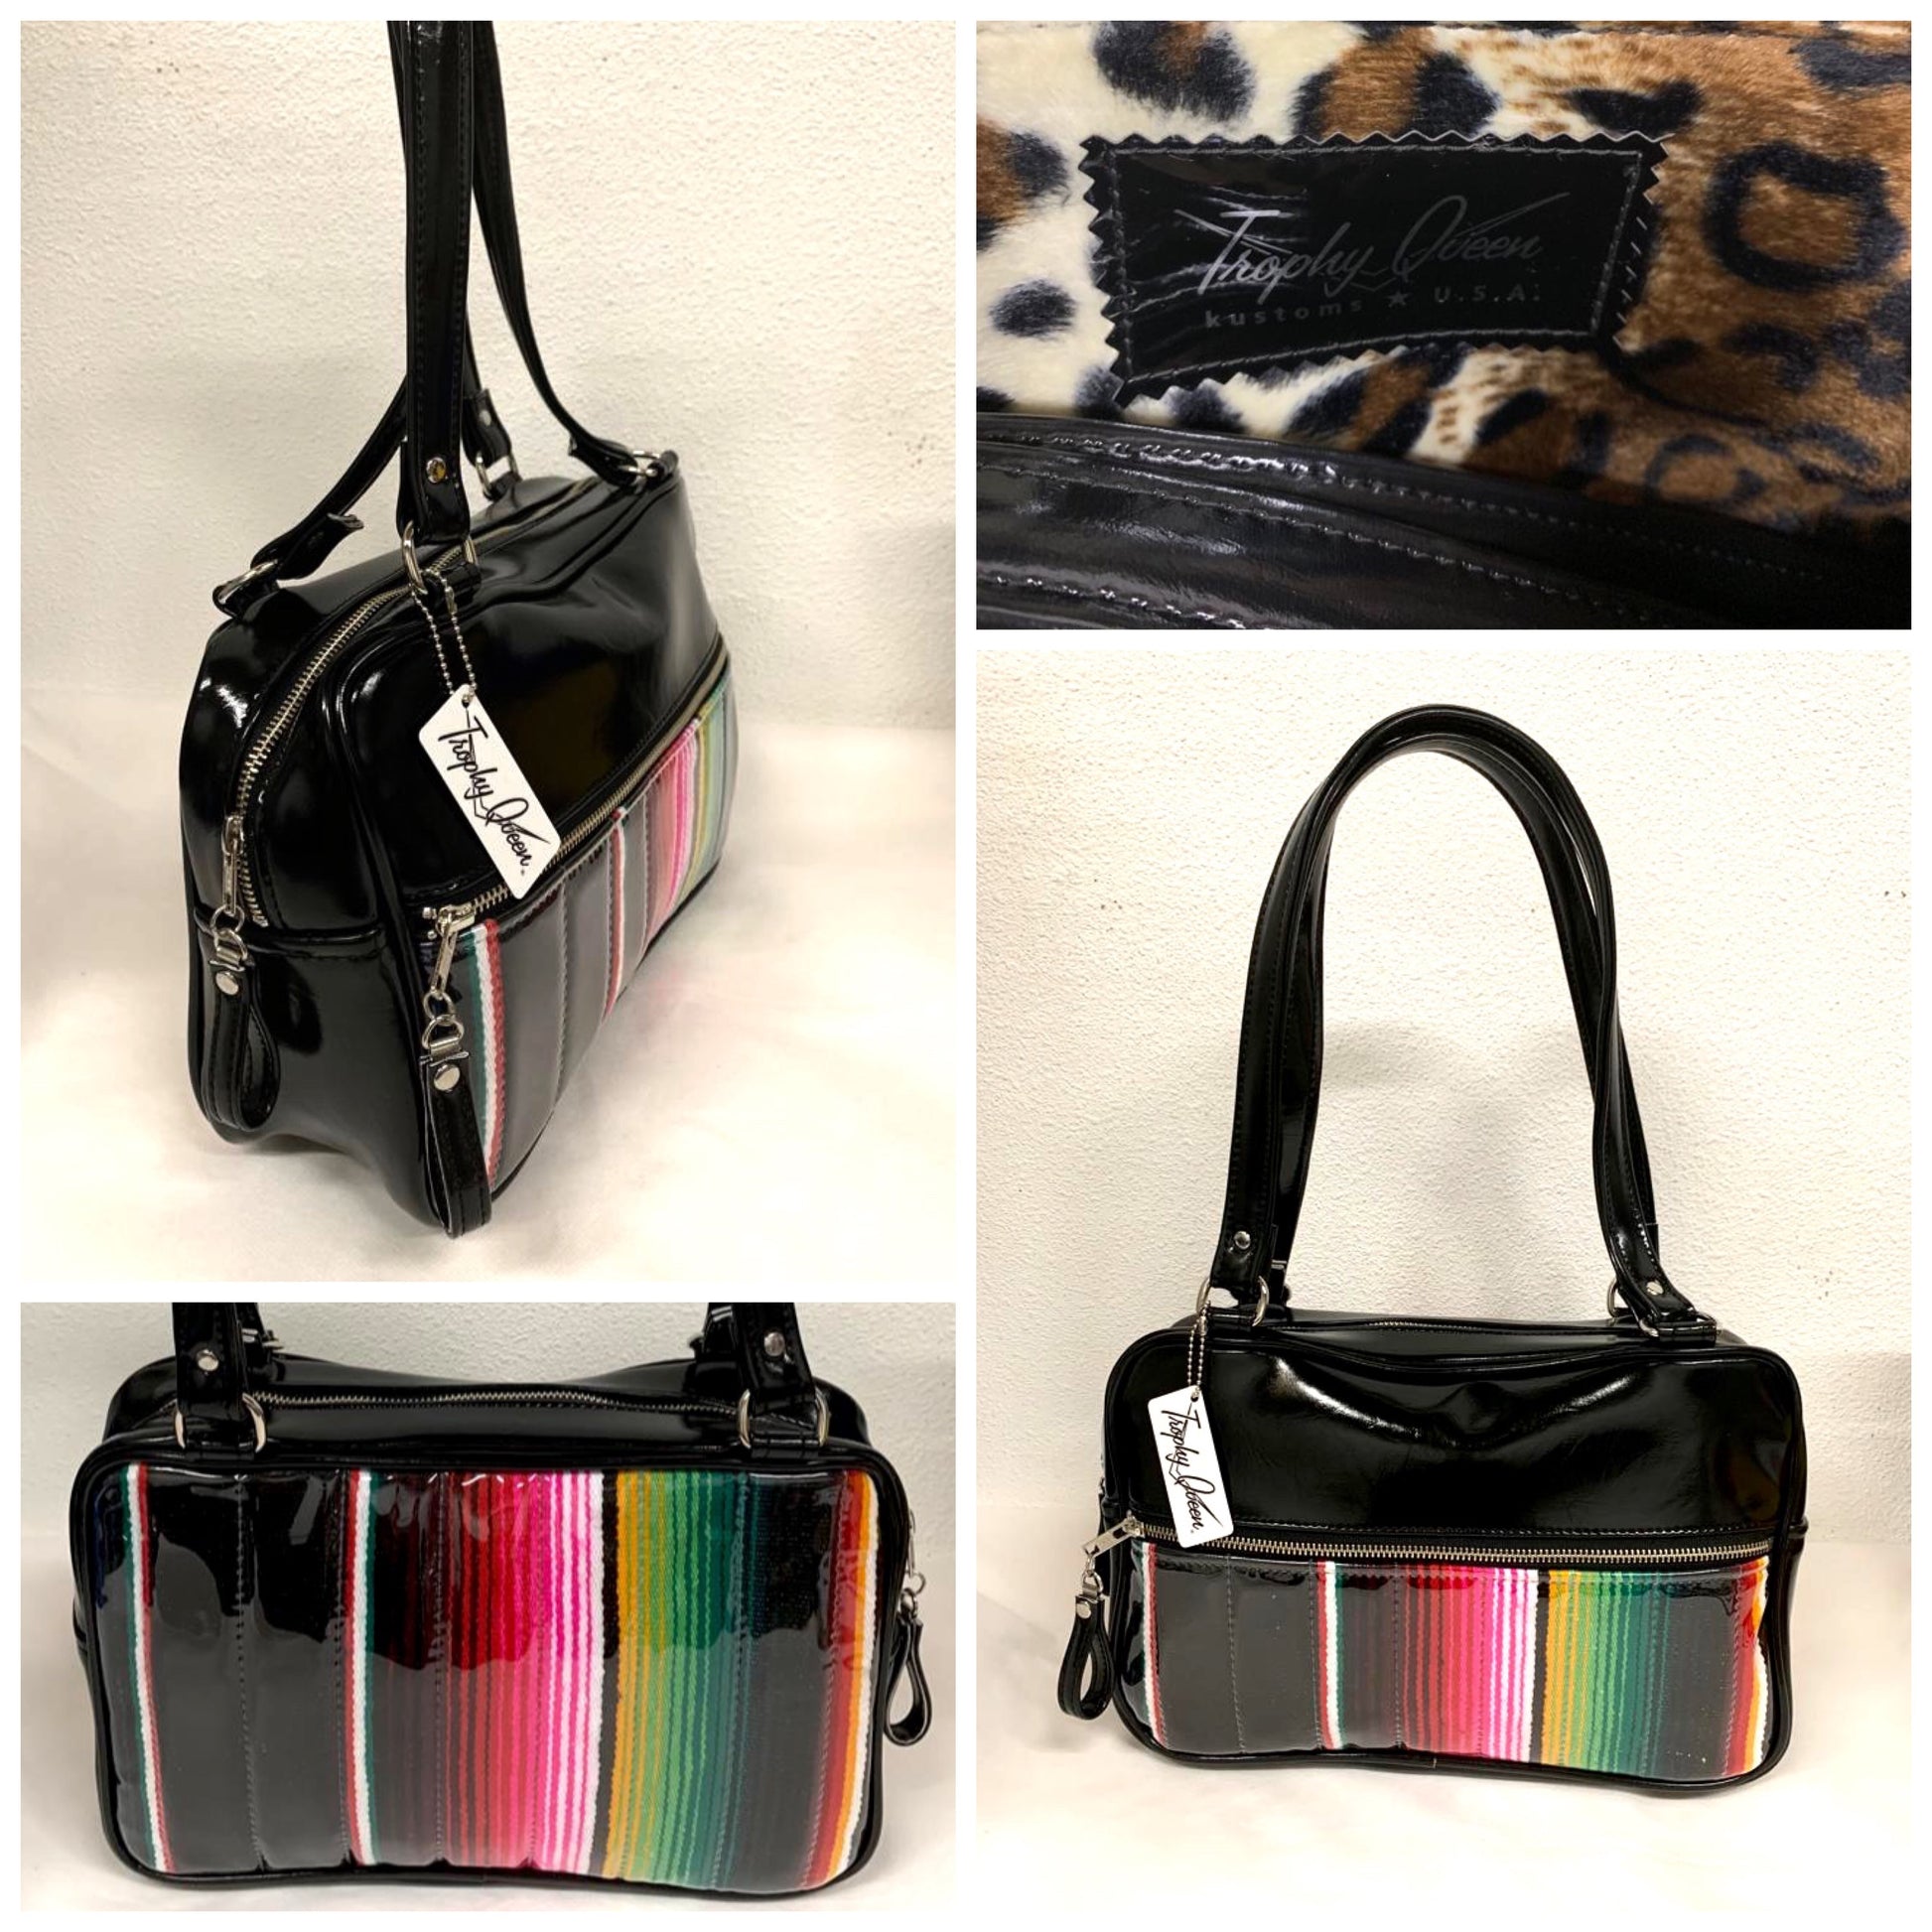 Fairlane Tote Bag - Mexican Blanket with Clear Overlay / Grease Black Vinyl  - Leopard Lining